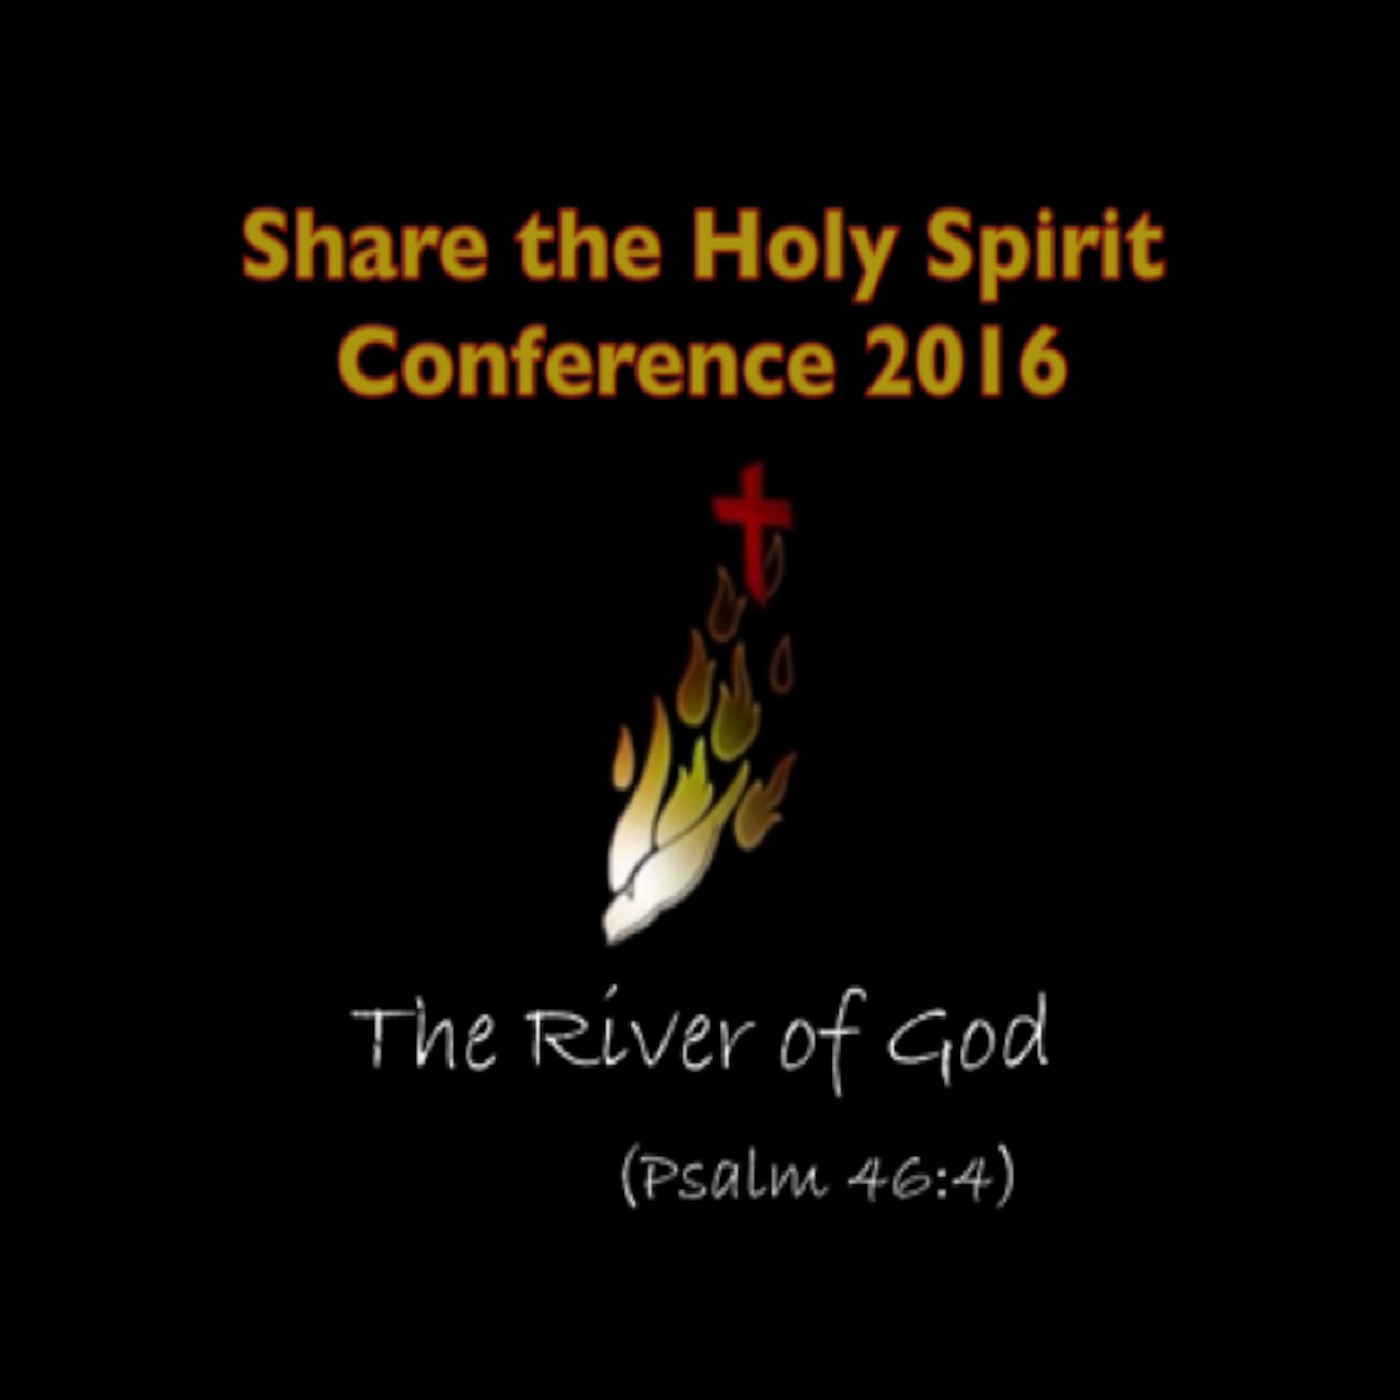 Share The Holy Spirit 2016 The River of God Podcast